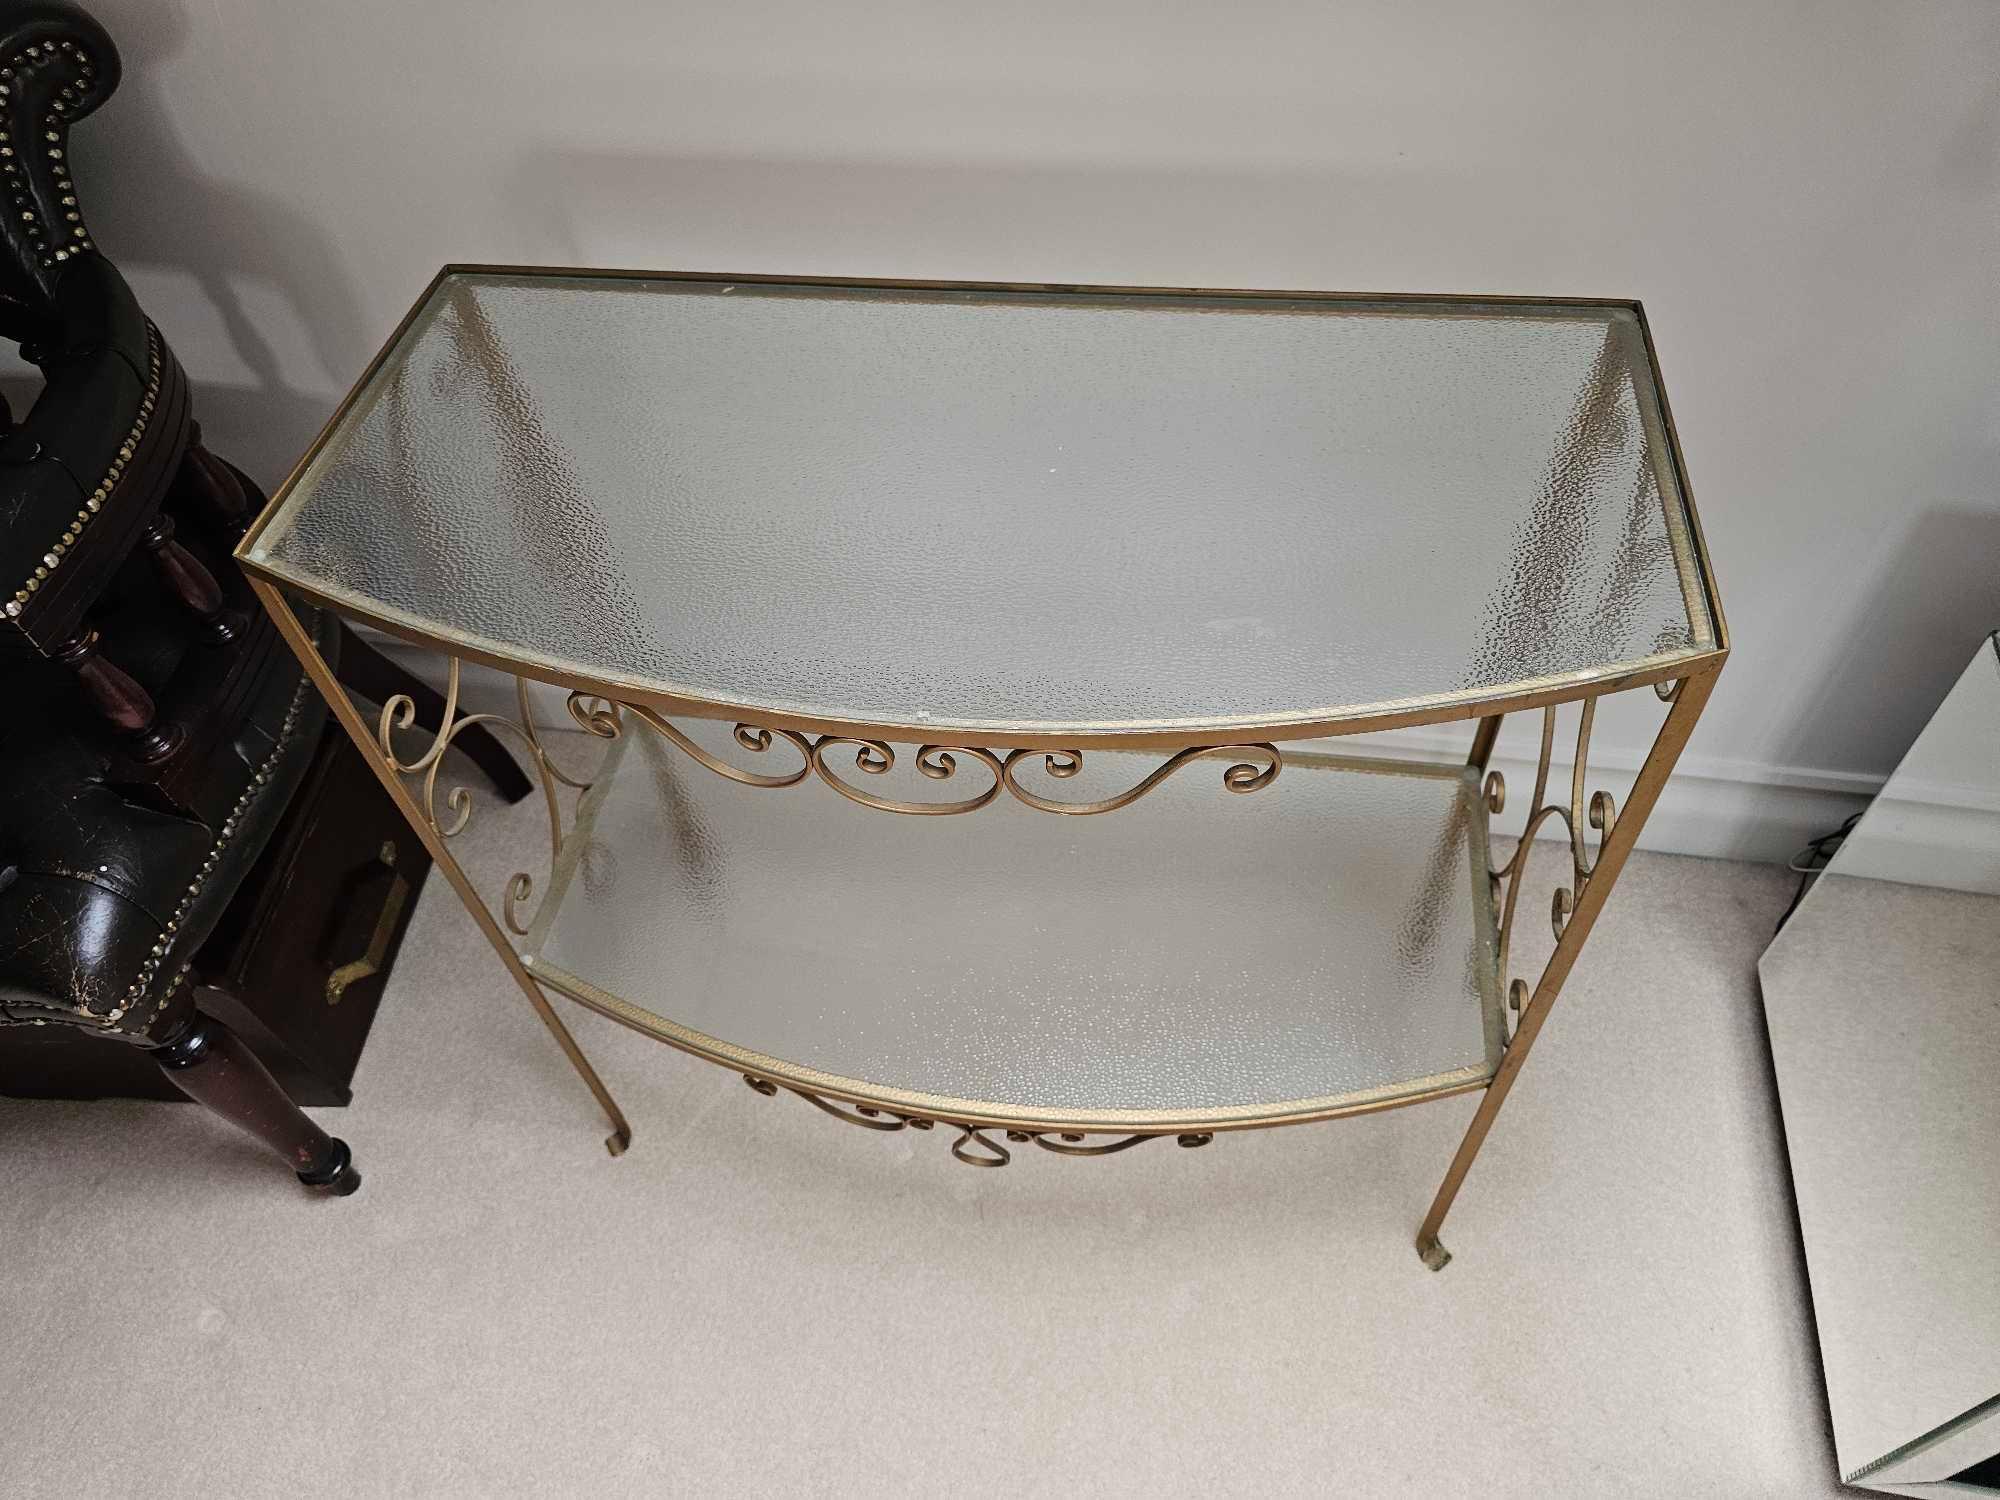 A Cast Metal Scroll Work Painted Console Table With Opaque Glass Top And Under Tier 74 X 36 X 75cm - Image 4 of 4